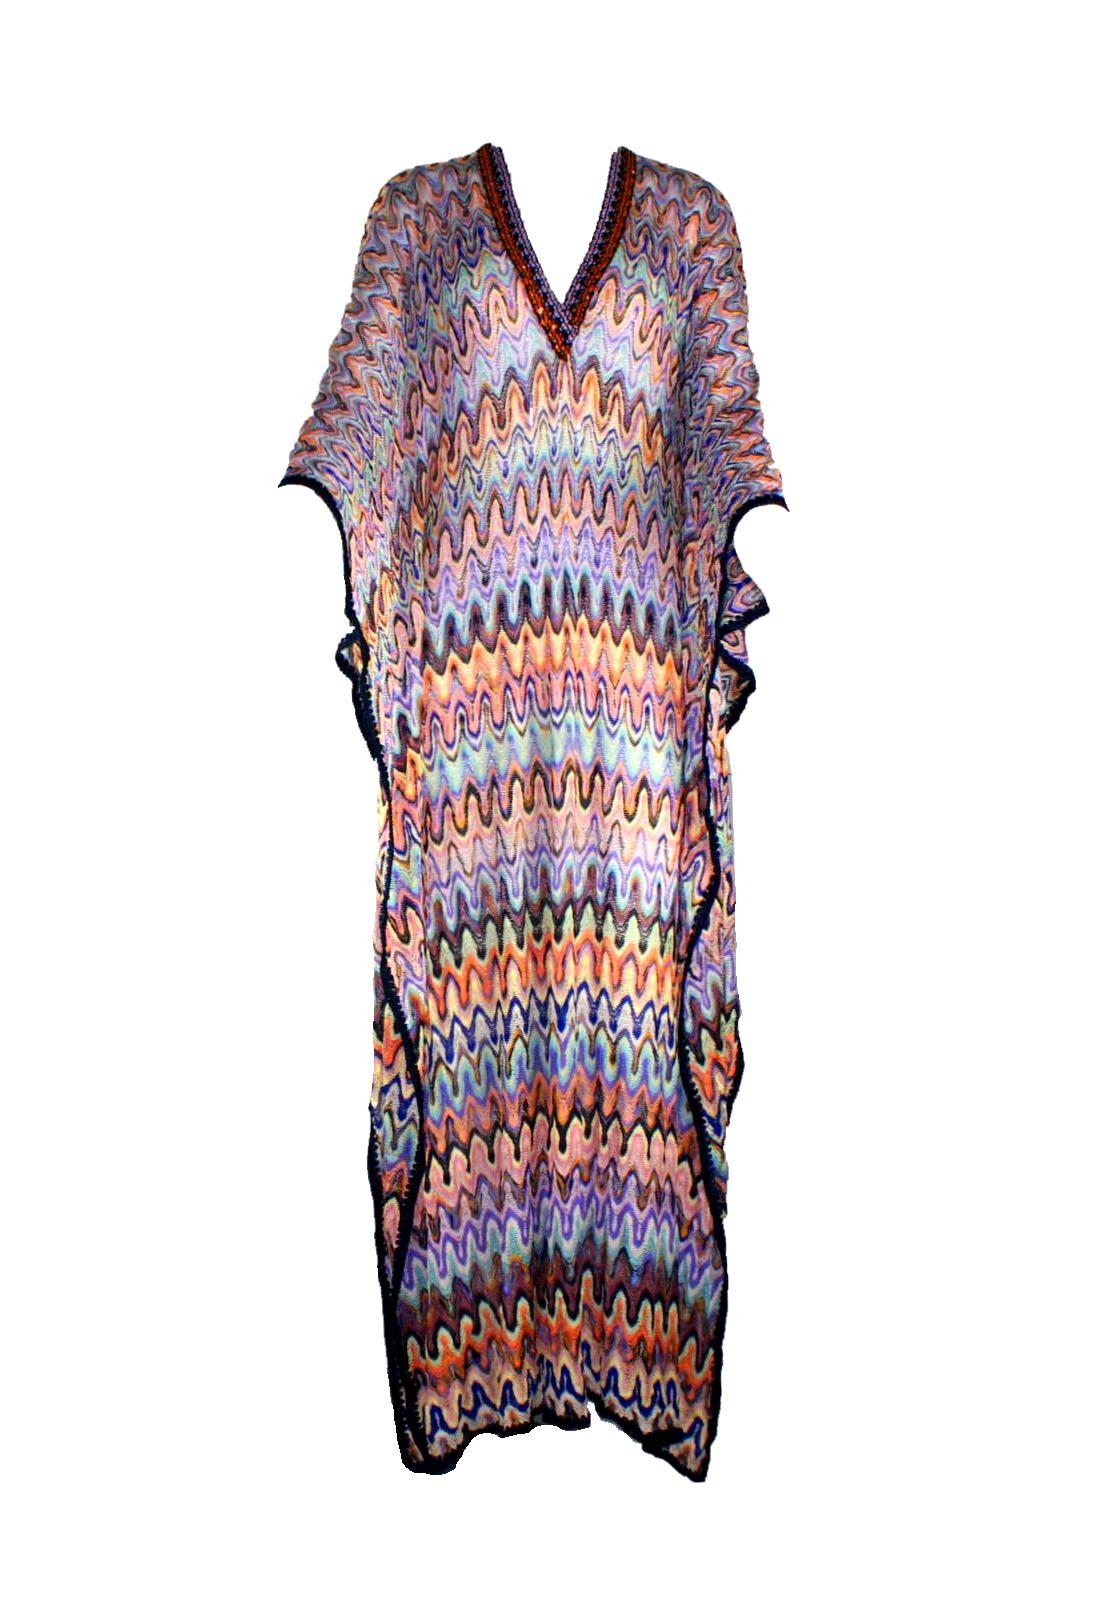 Stunning Missoni Maxi Dress
In the famous Missoni signature zigzag pattern
Beautiful colors
V-Neck embellished with tiny sparkling sequins
Dark crochet knit trimming
Sexy slits on side
Marked Size S
Made in Italy
Dry Clean Only
New, unworn